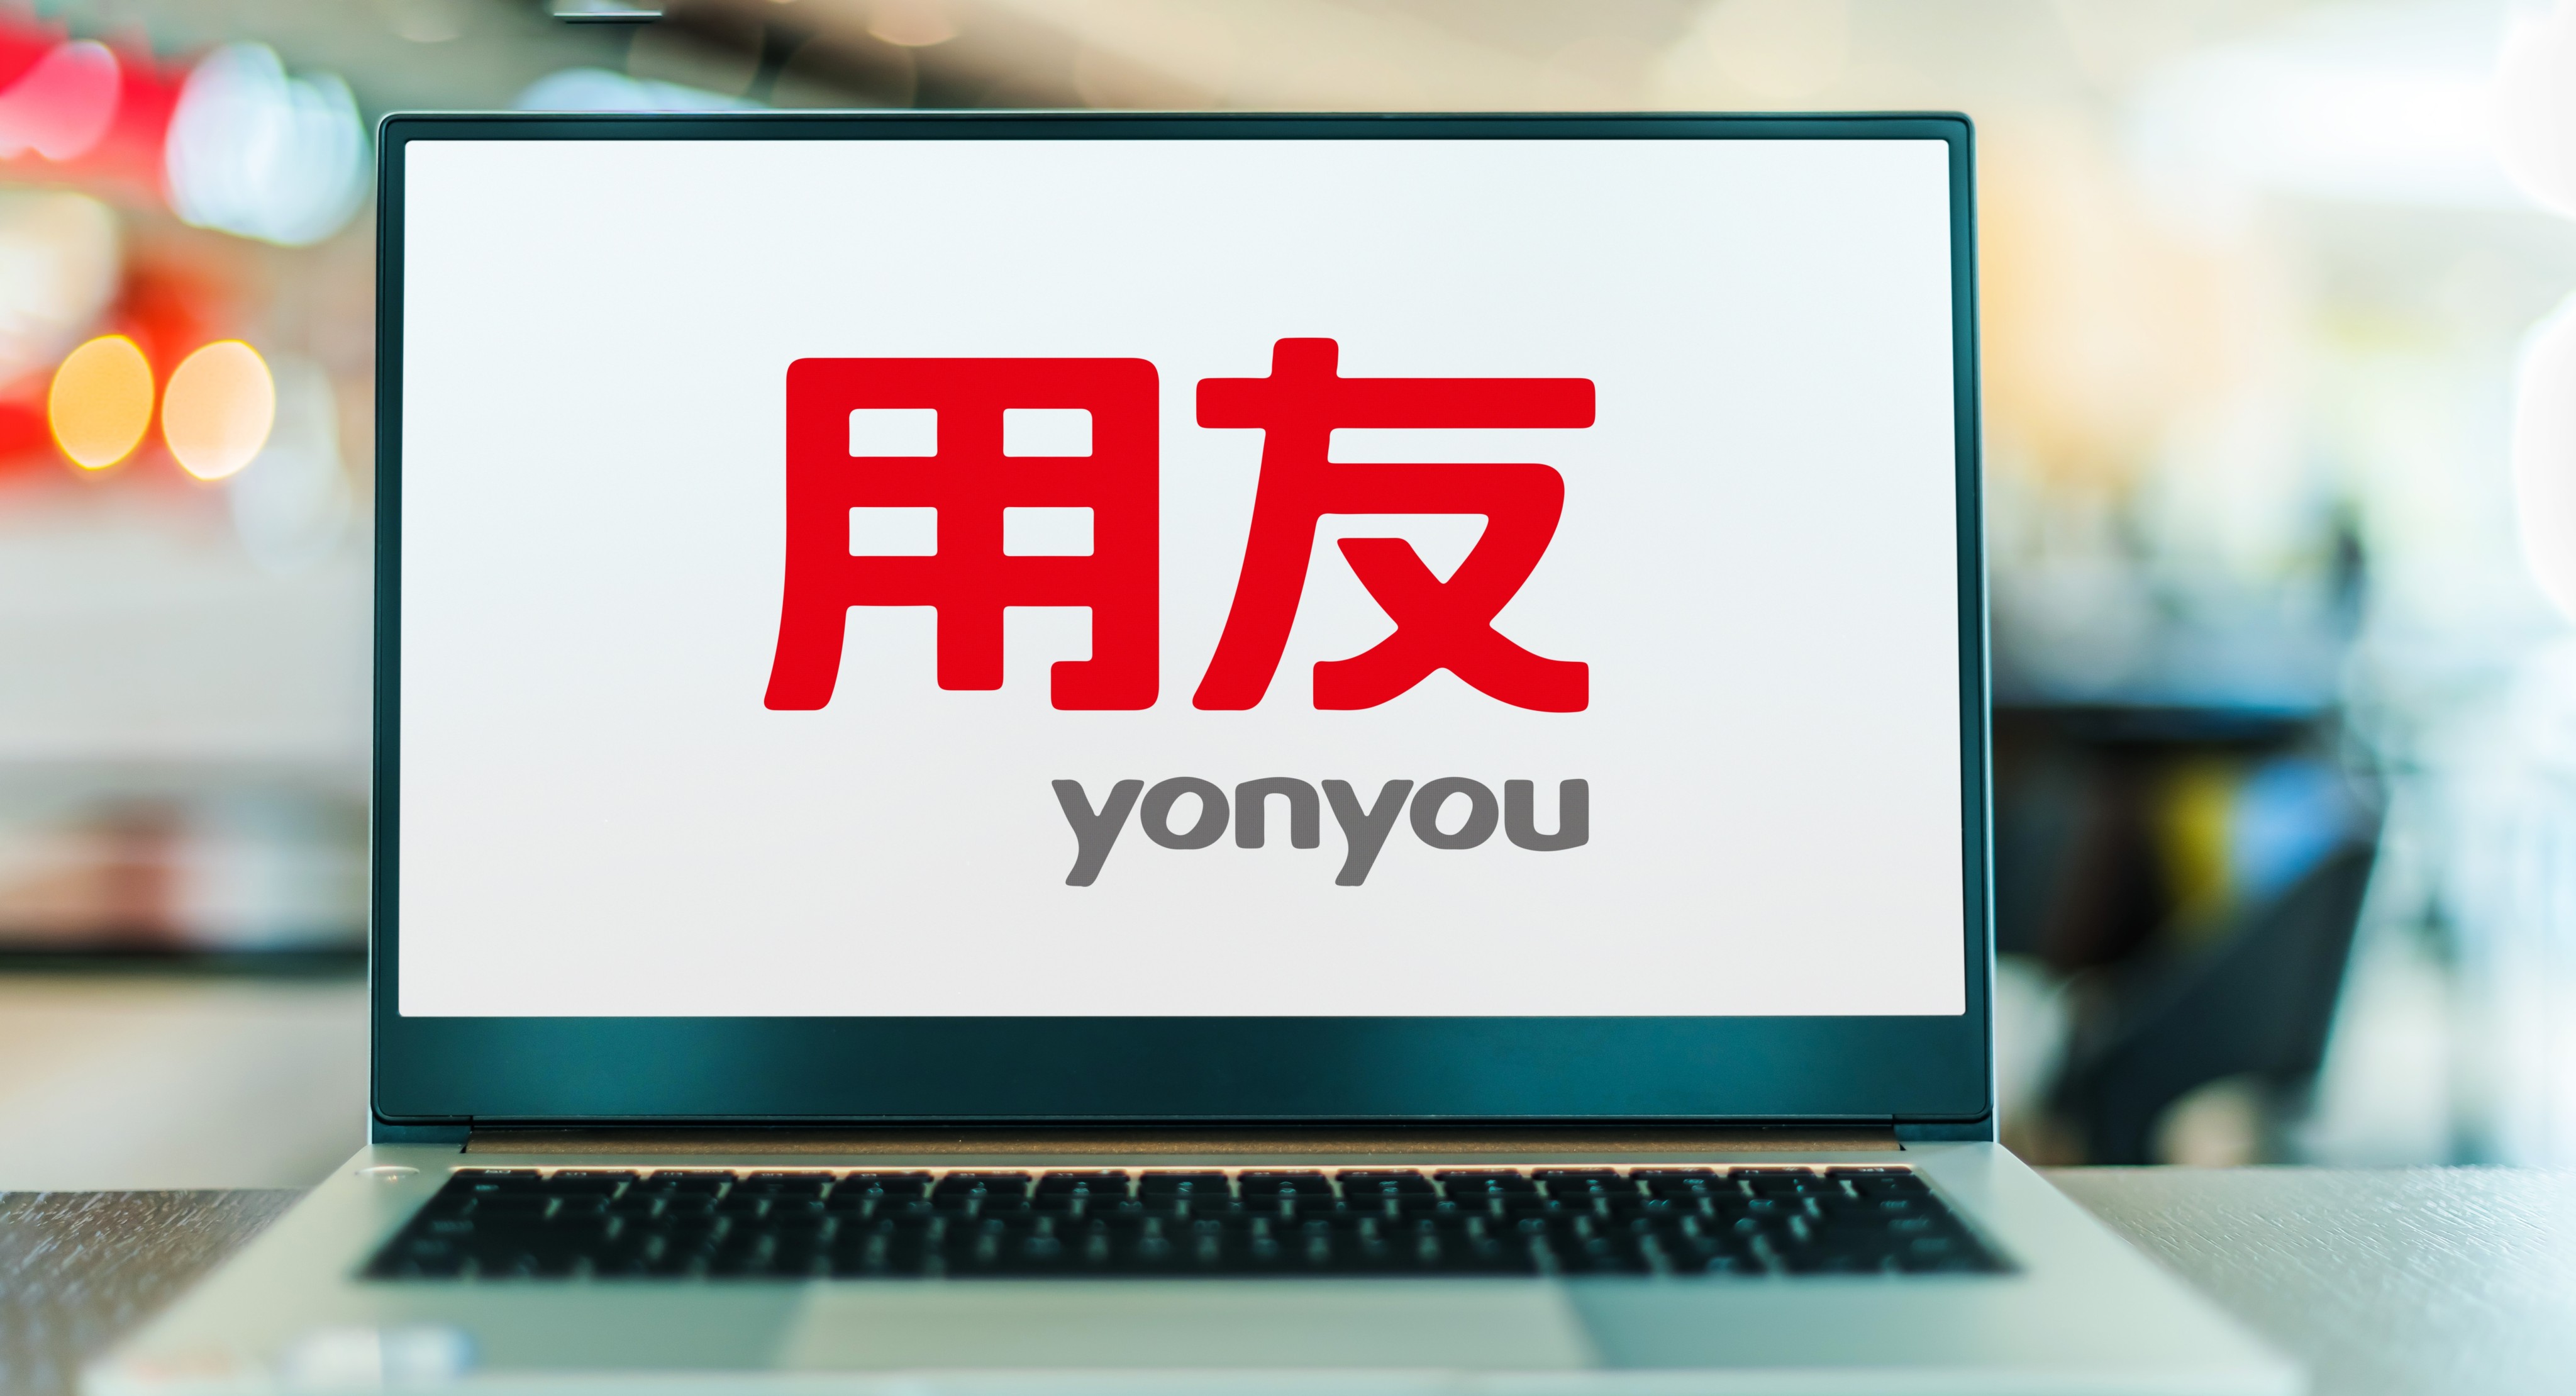 Yonyou Network Technology, formerly known as Ufida, has been mainland China’s largest enterprise management software provider for many years. Photo: Shutterstock